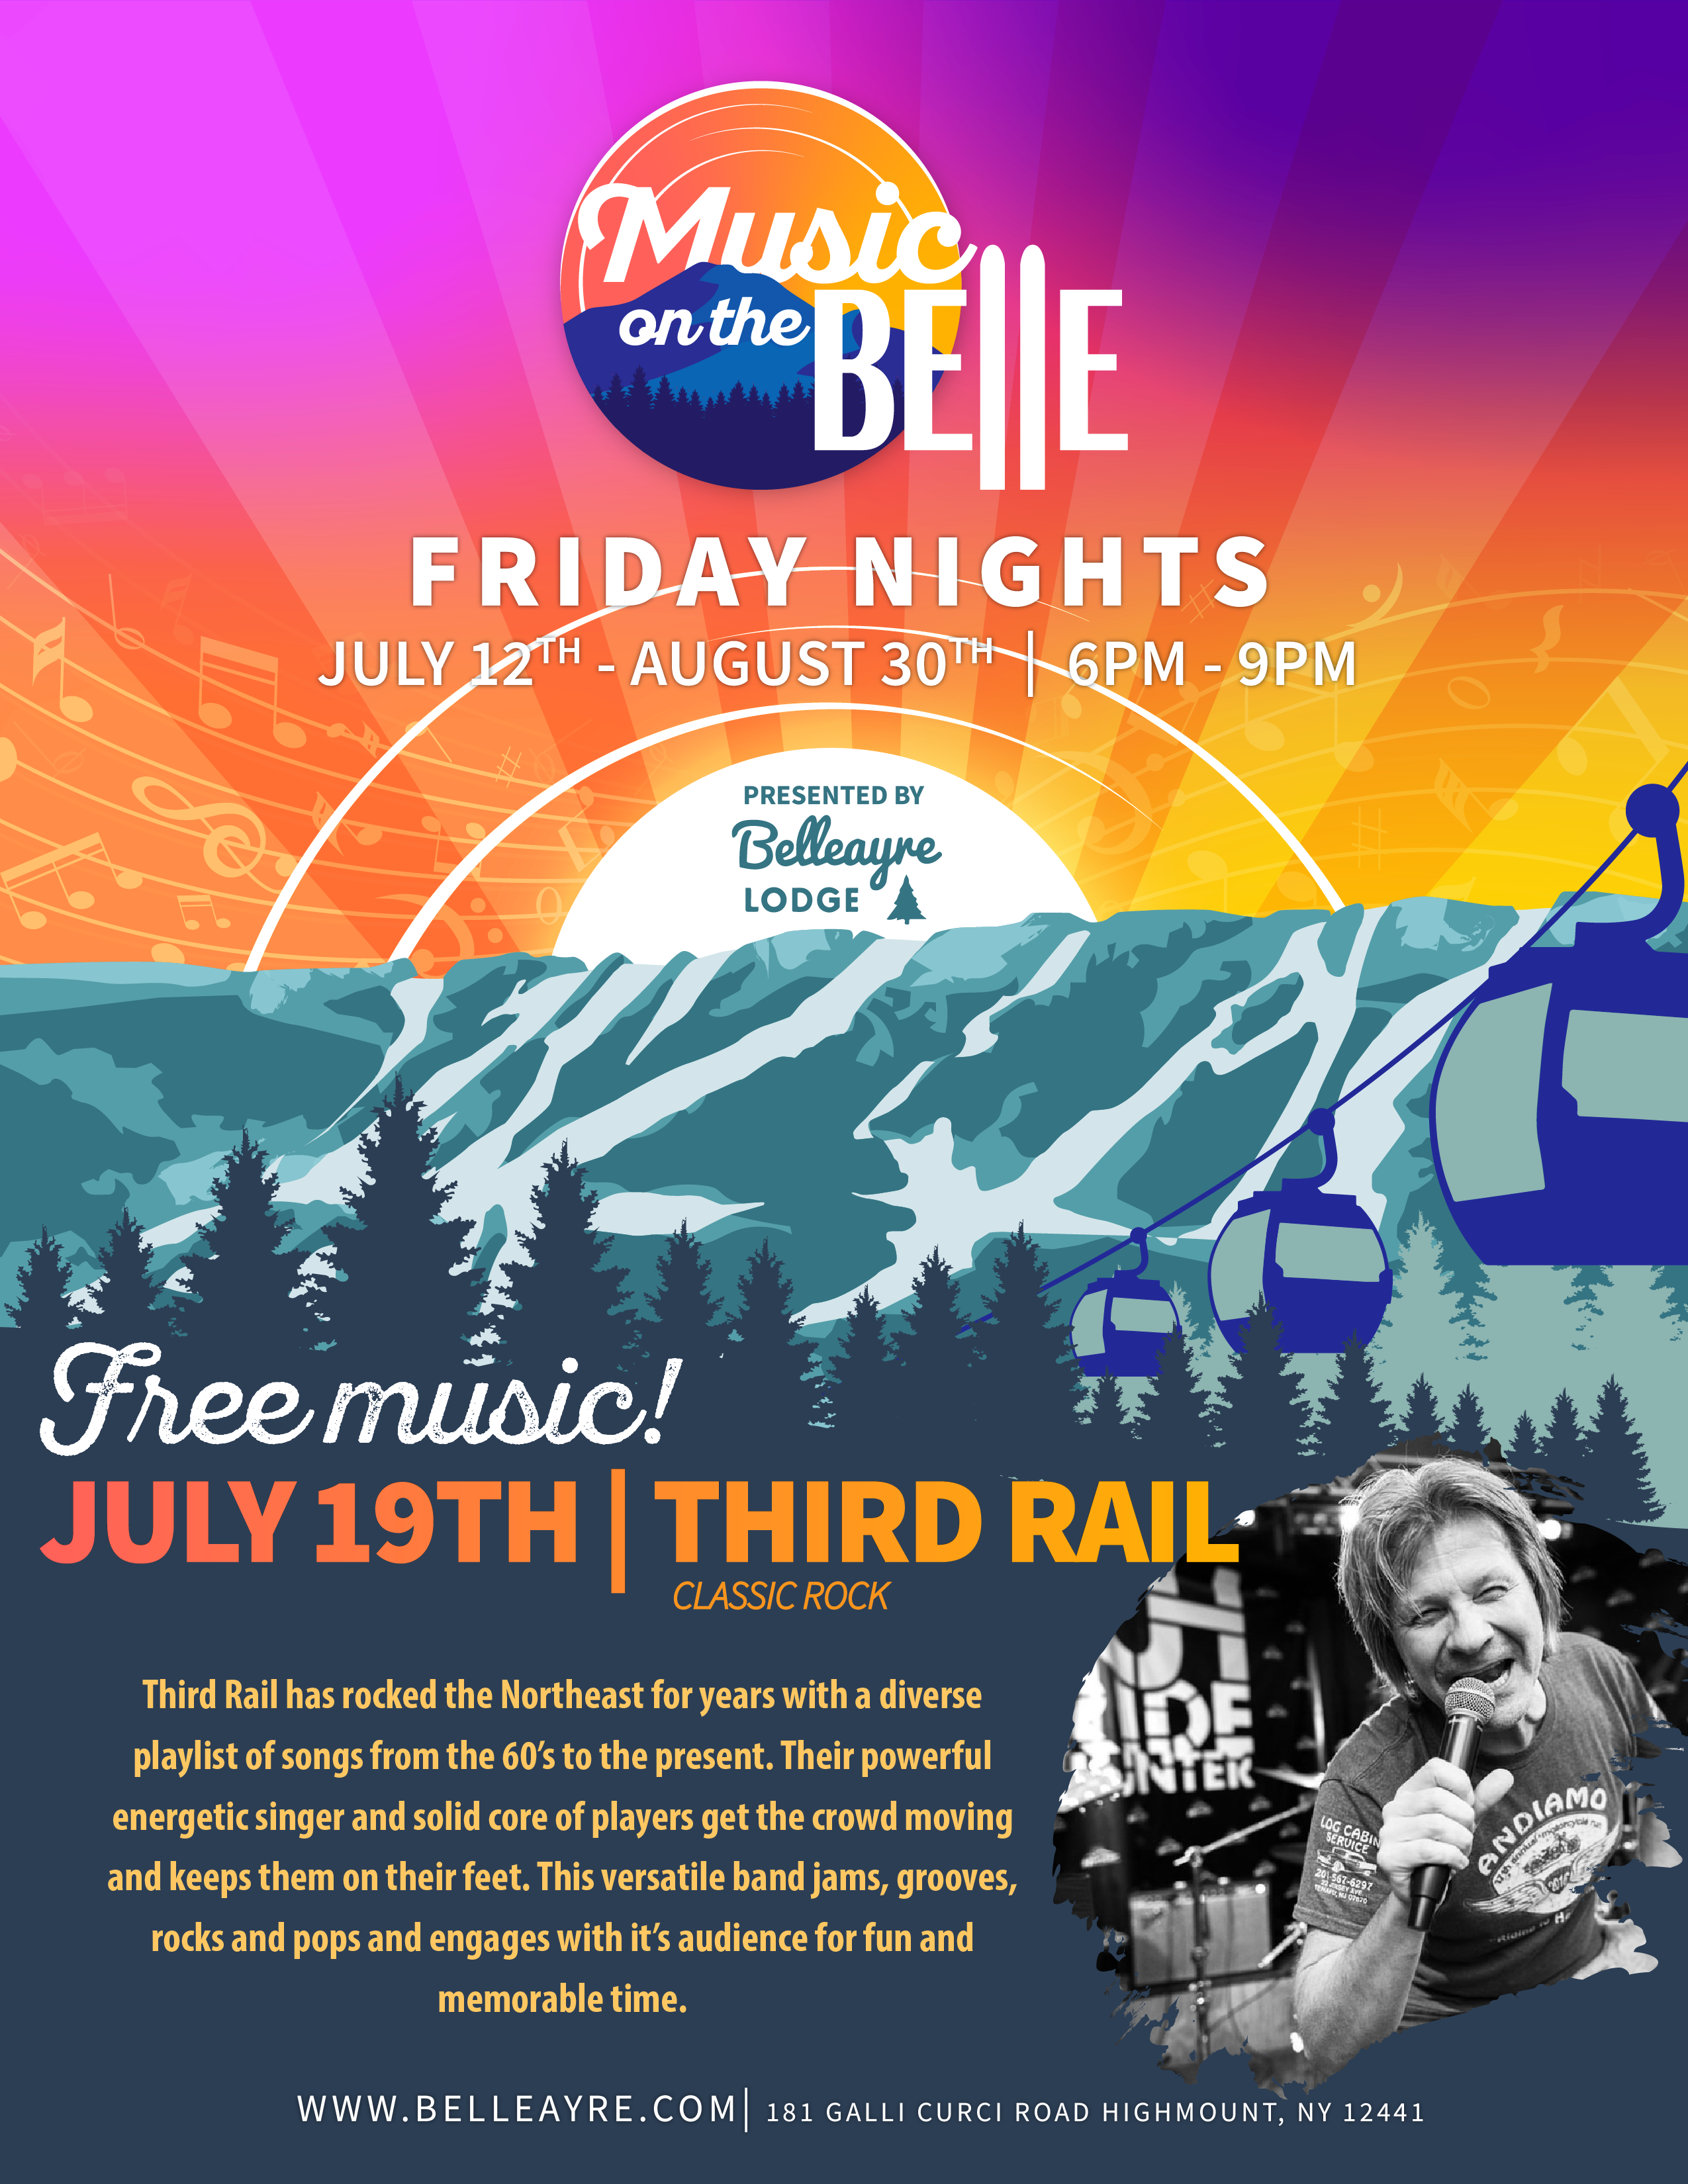 Third Rail music on the belle friday nights flyer July 19th